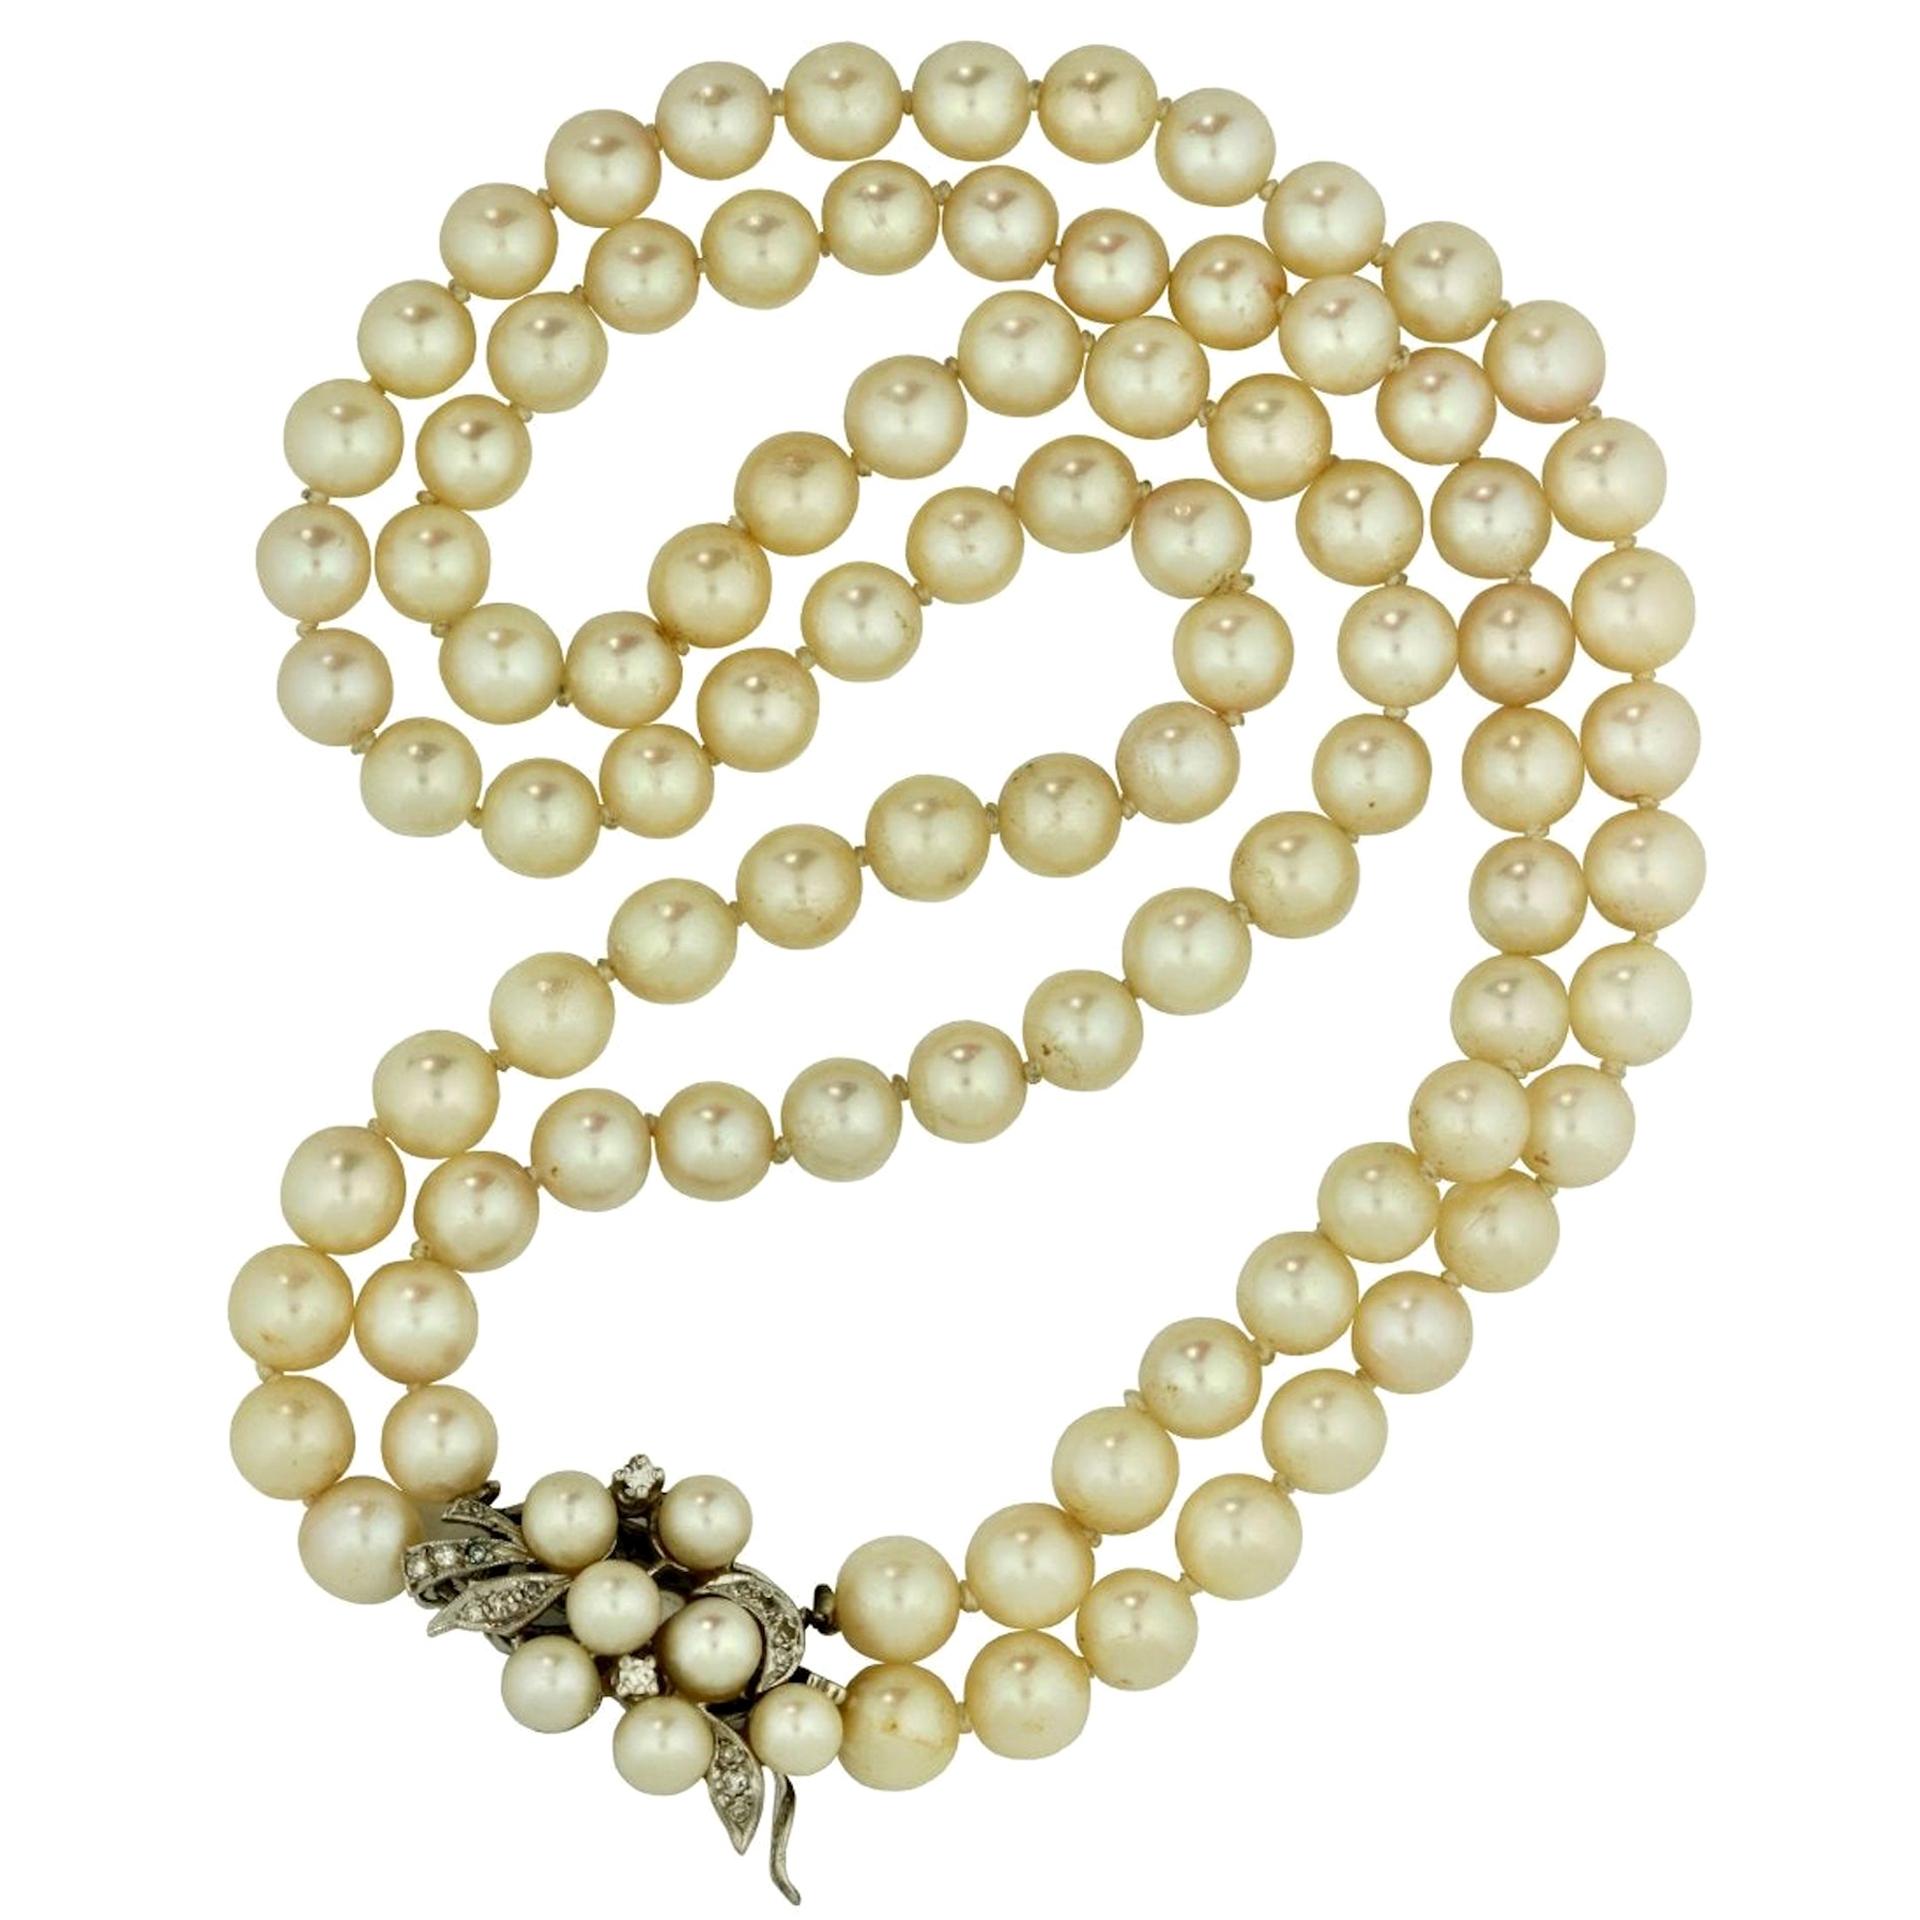 Cultured Pearl Necklace the Double Graduated Strand